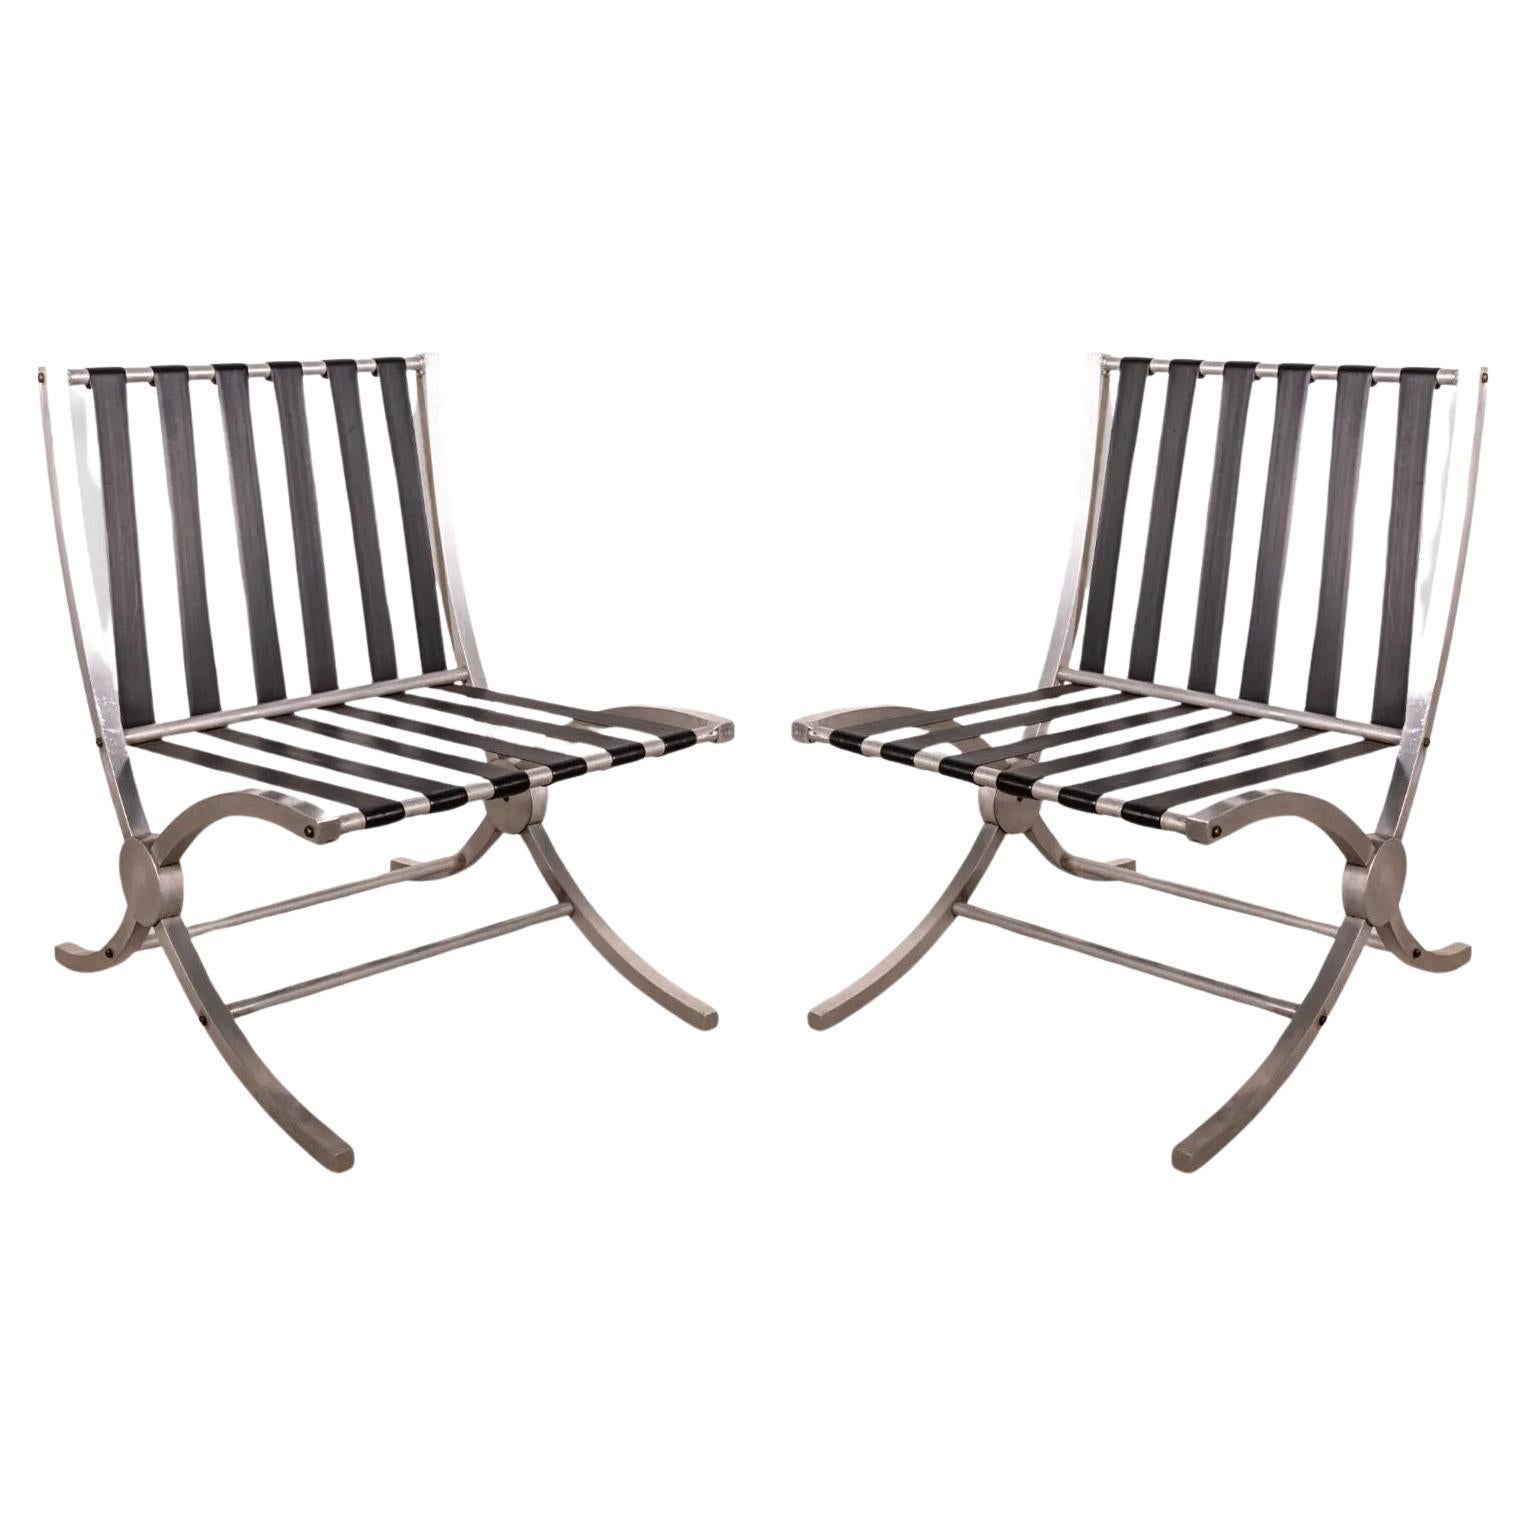 Pair of Art Deco Aluminum and Black Barcelona Style X Framed Sleek Lounge Chairs For Sale